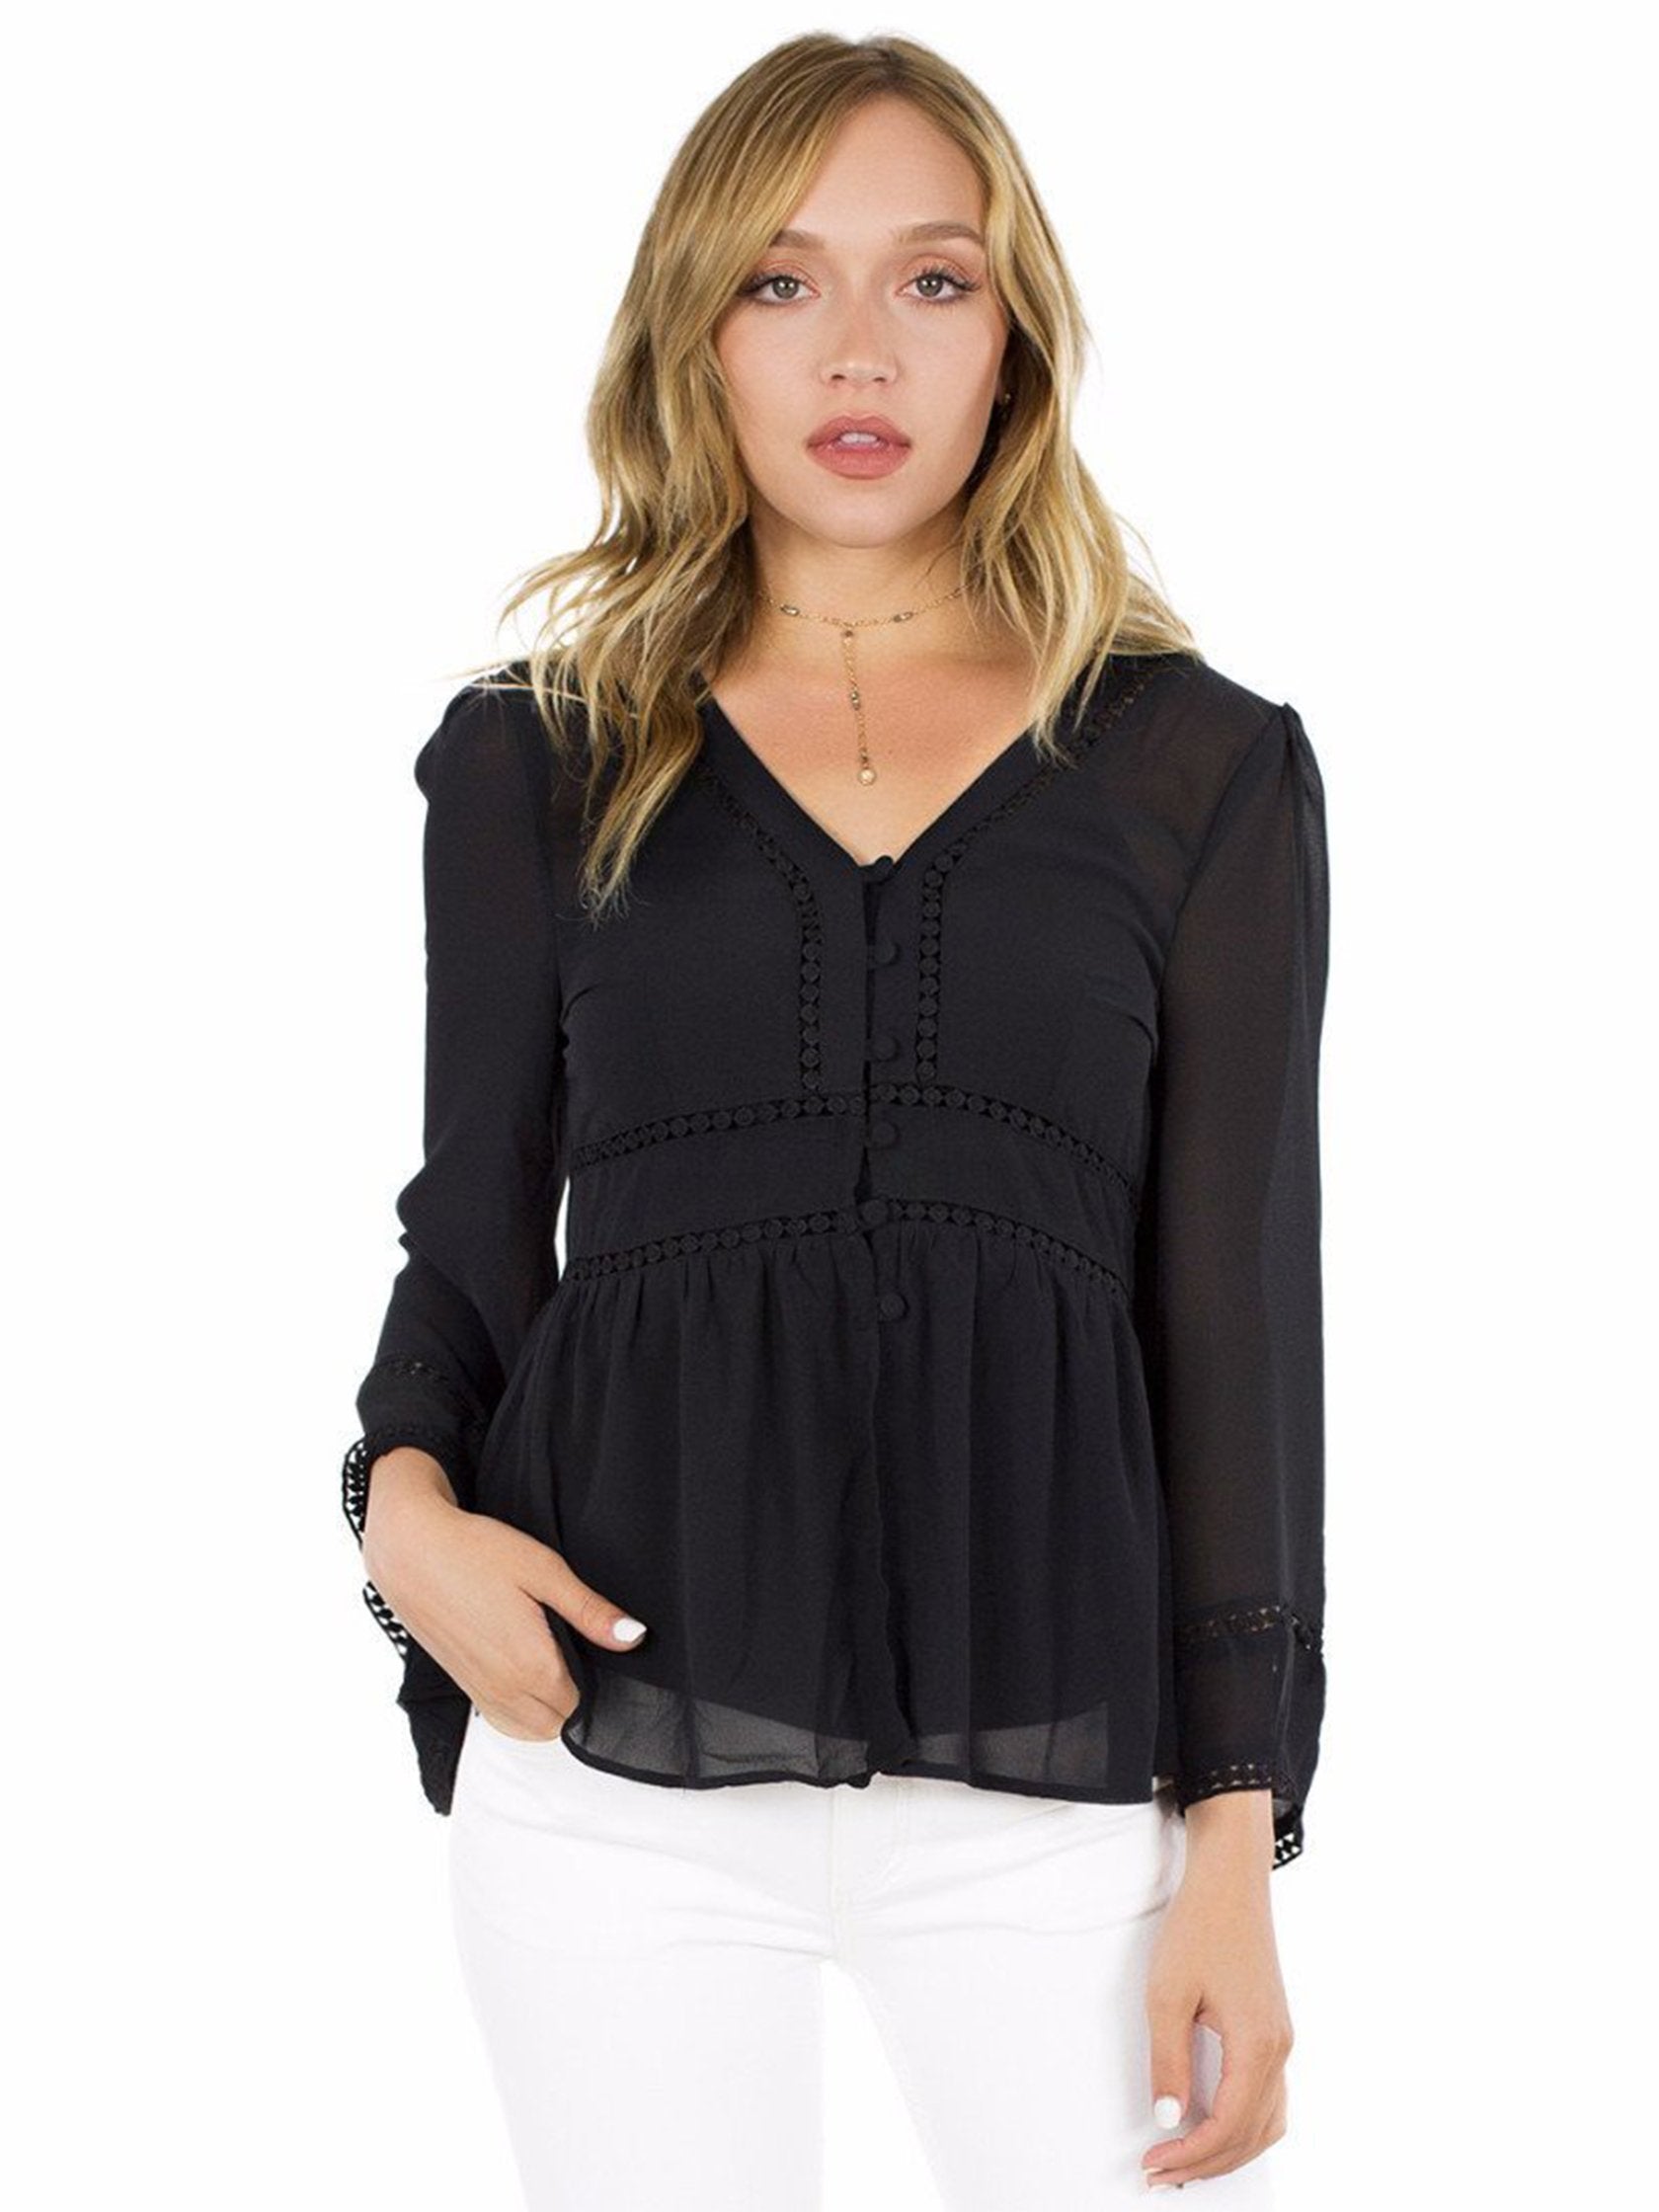 Woman wearing a top rental from FashionPass called All Buttoned Up Shirt